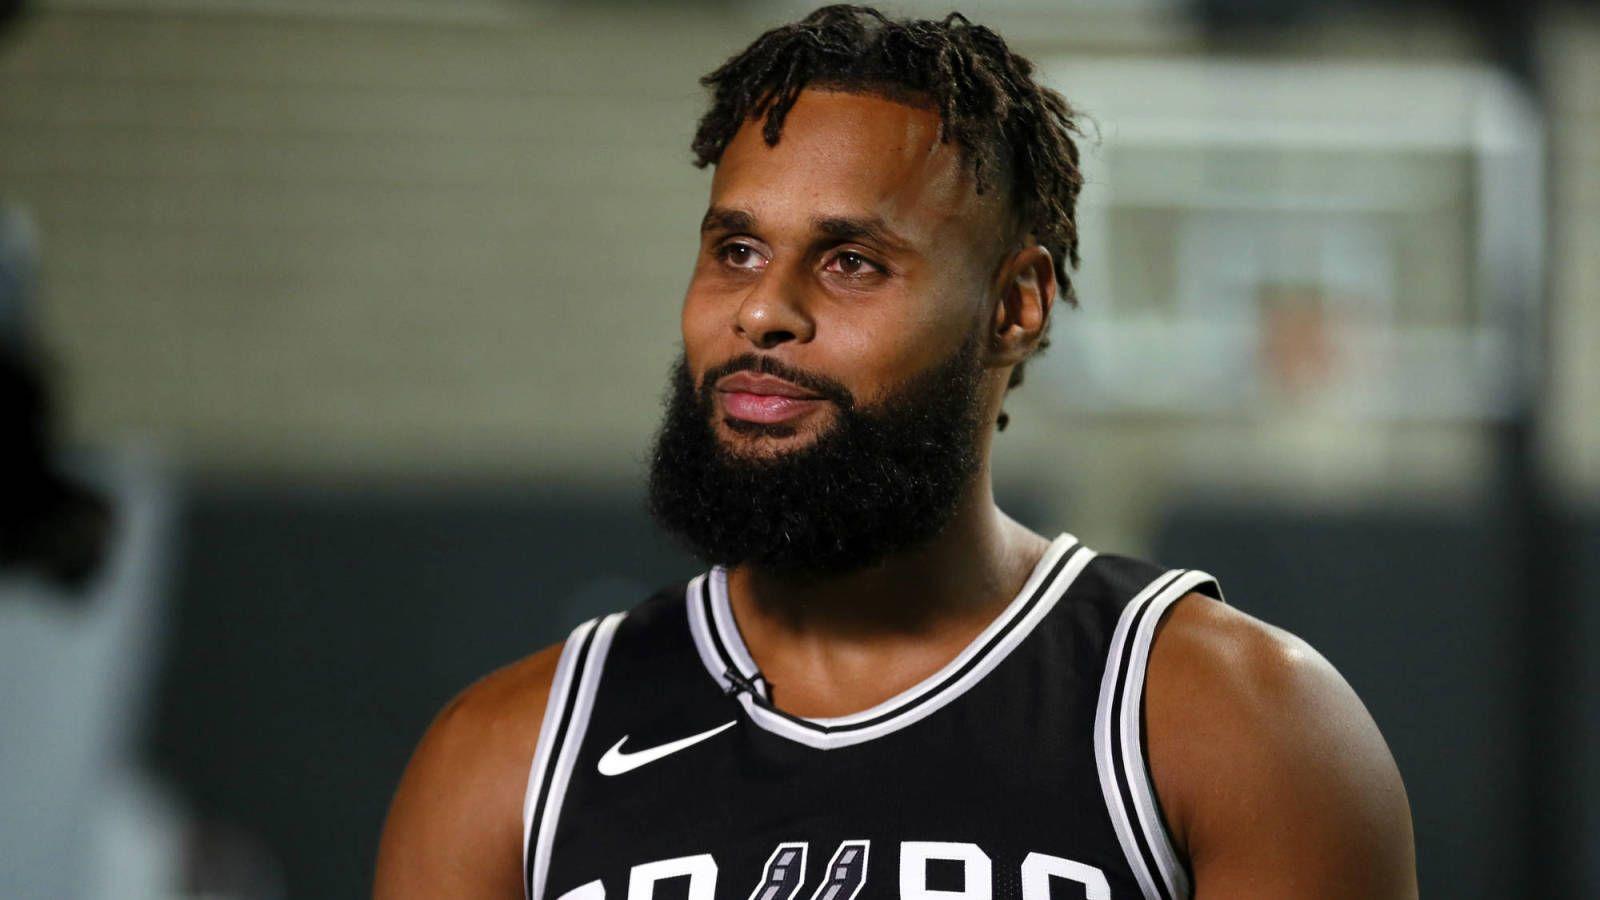 Cavs trying to identify fan who yelled racial slur at Patty Mills